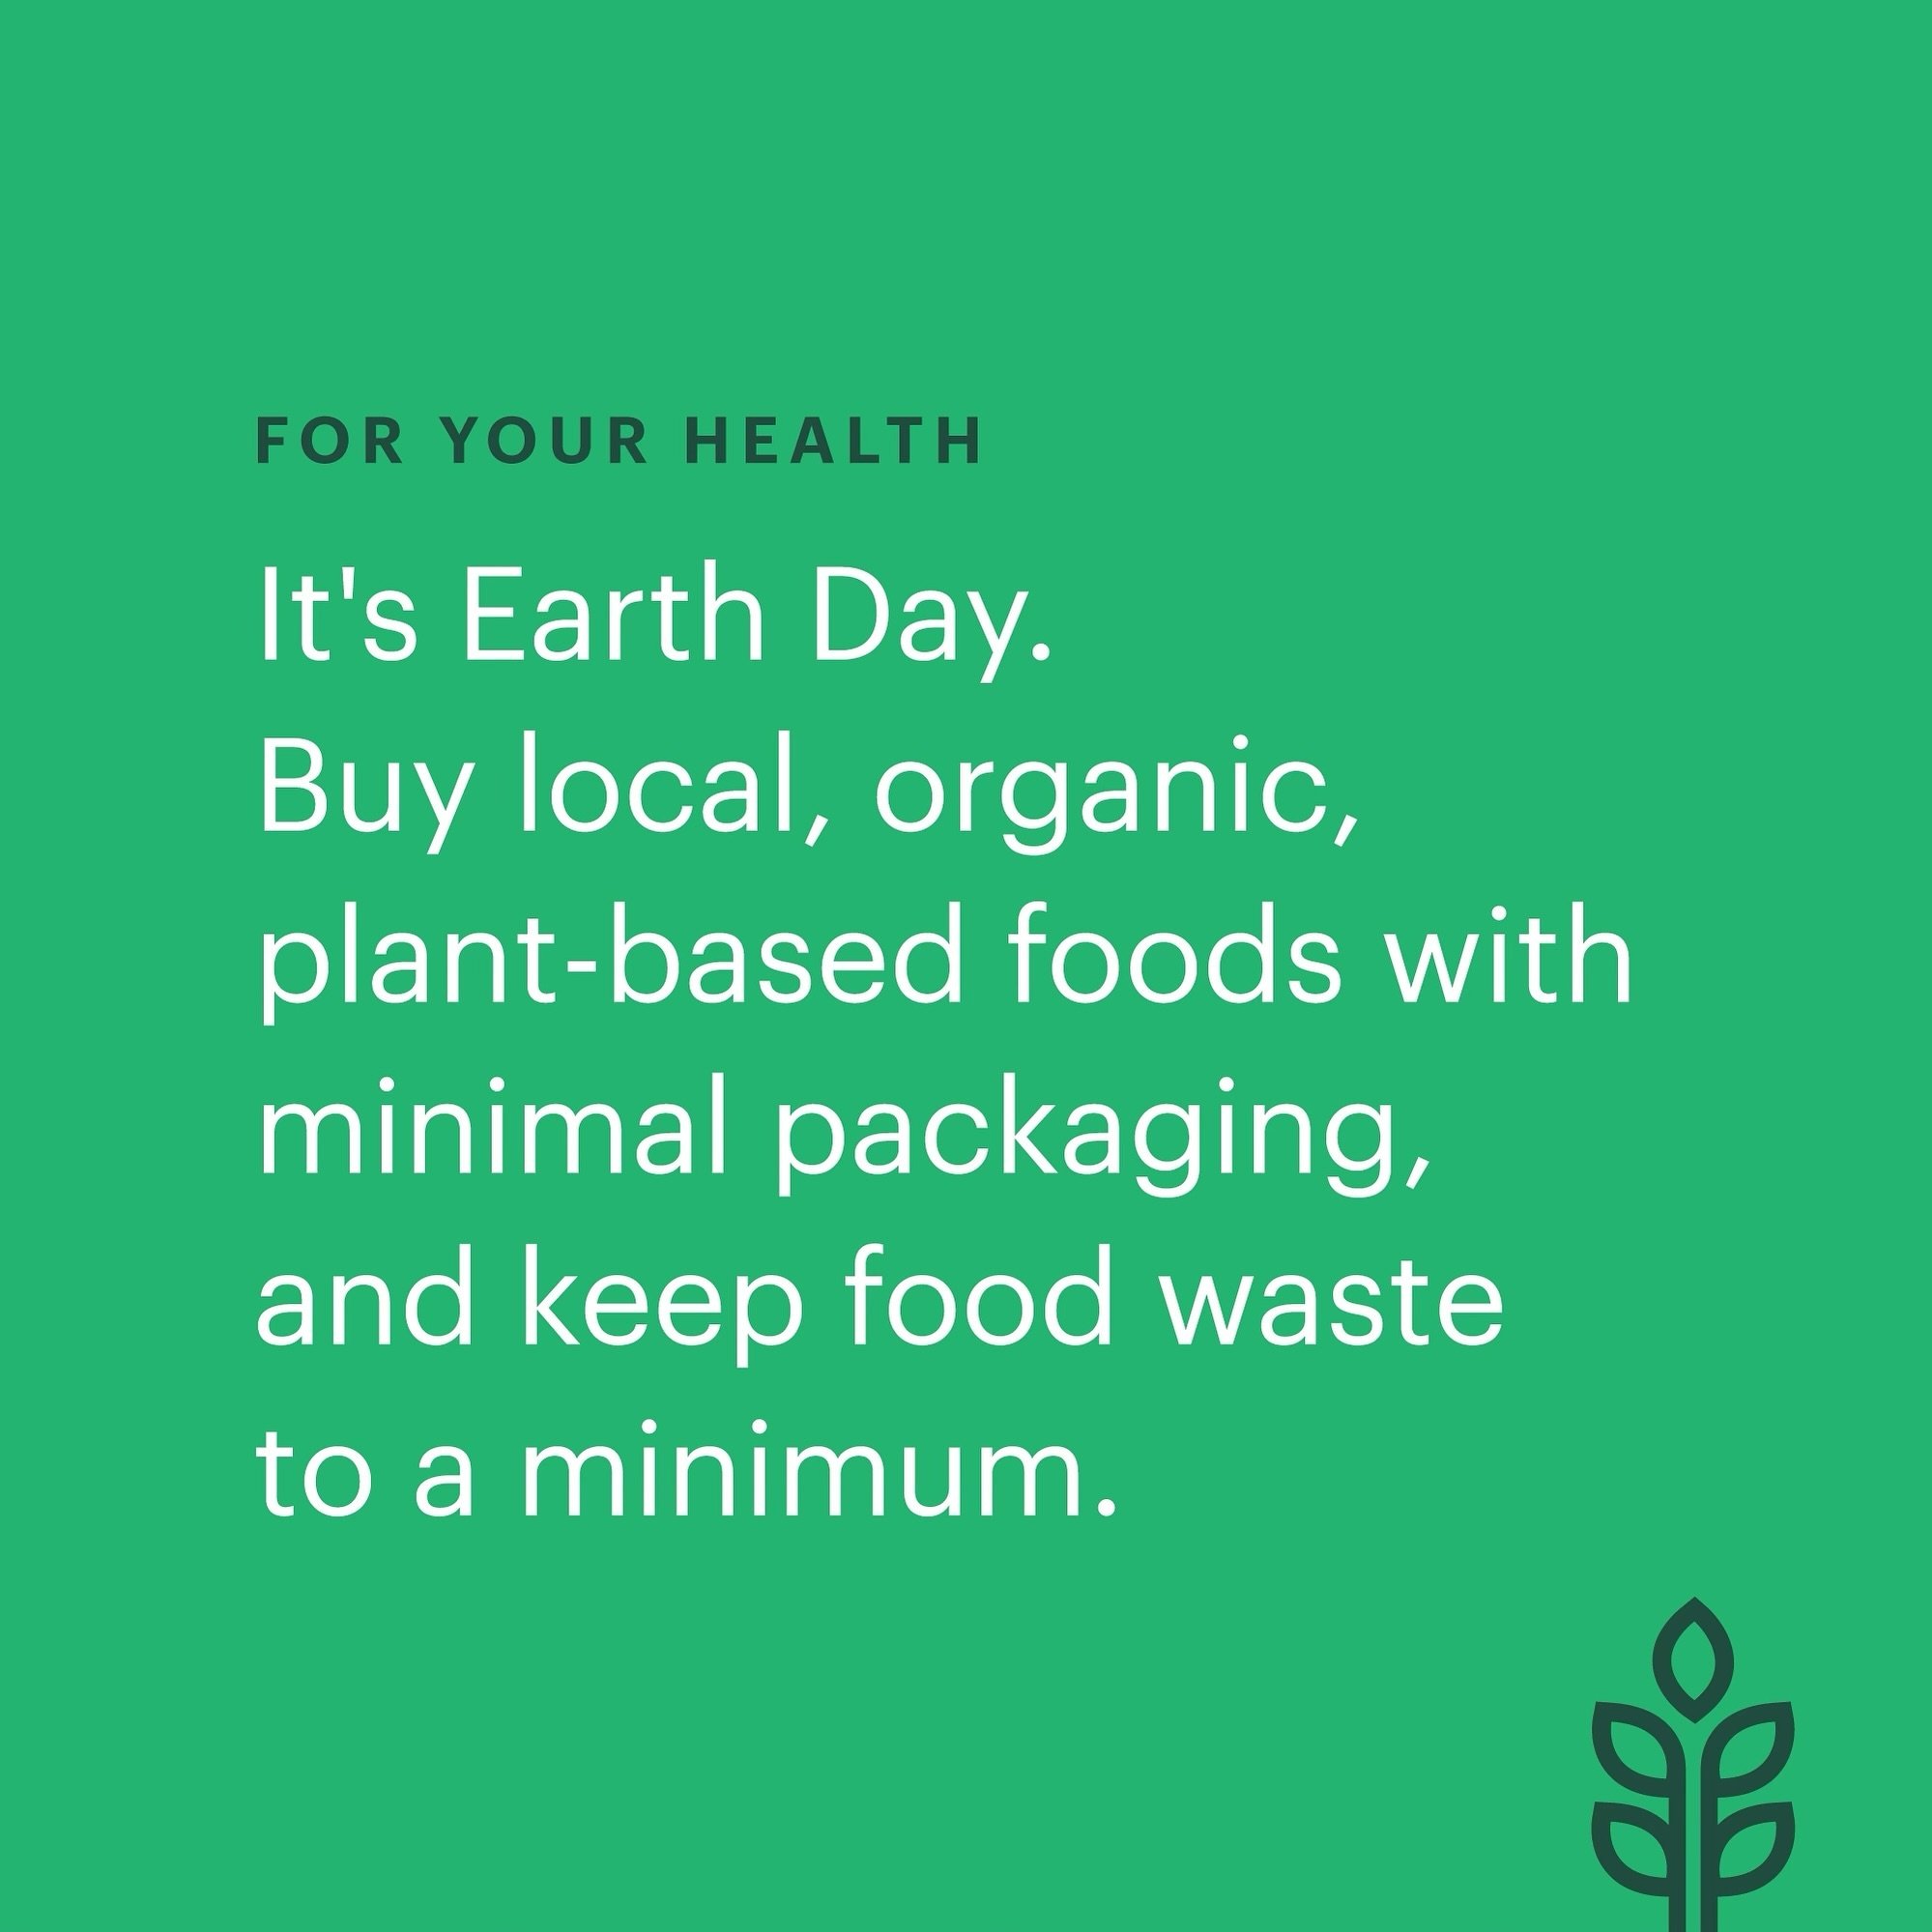 Adopting these practices offers profound benefits for everyone, enhancing the health of our planet and its inhabitants. By purchasing local and organic foods, we support the local economy and reduce the environmental toll of transportation. Choosing 